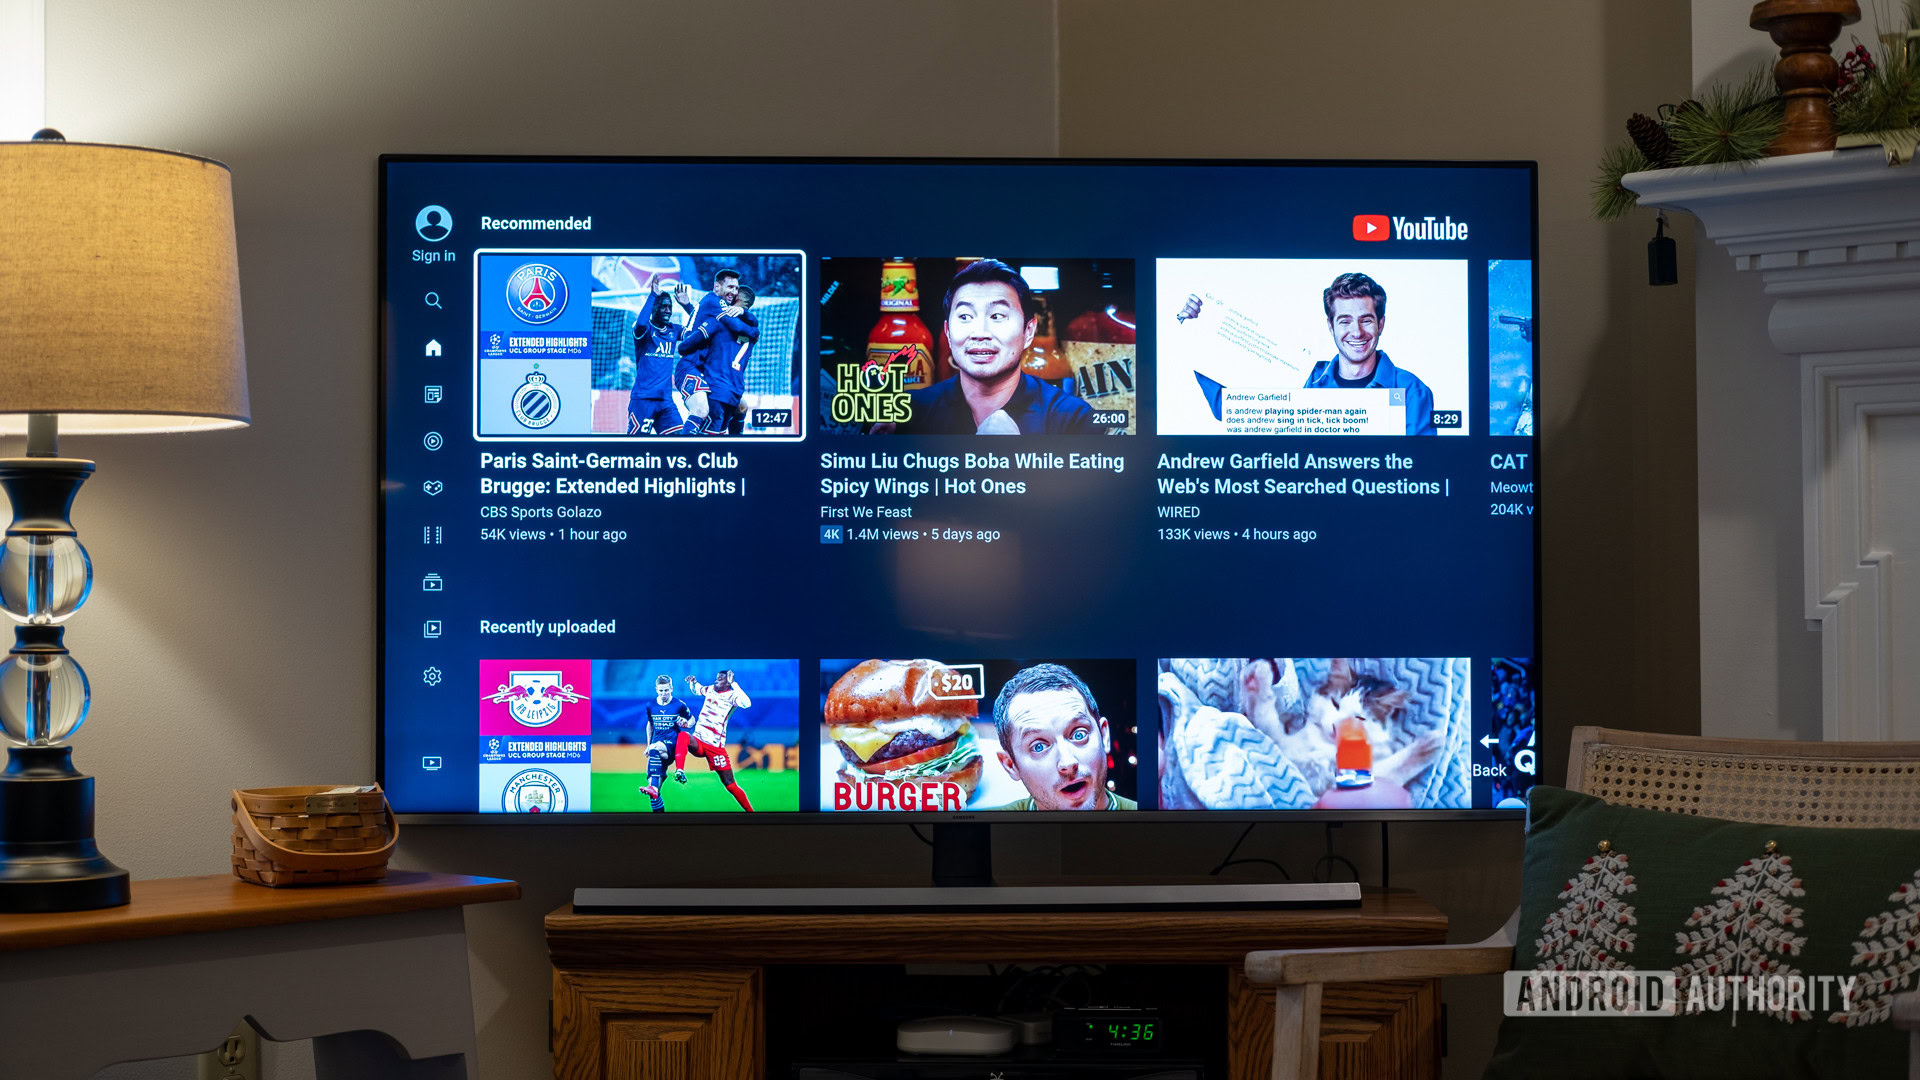 The Best Streaming Services for Live TV